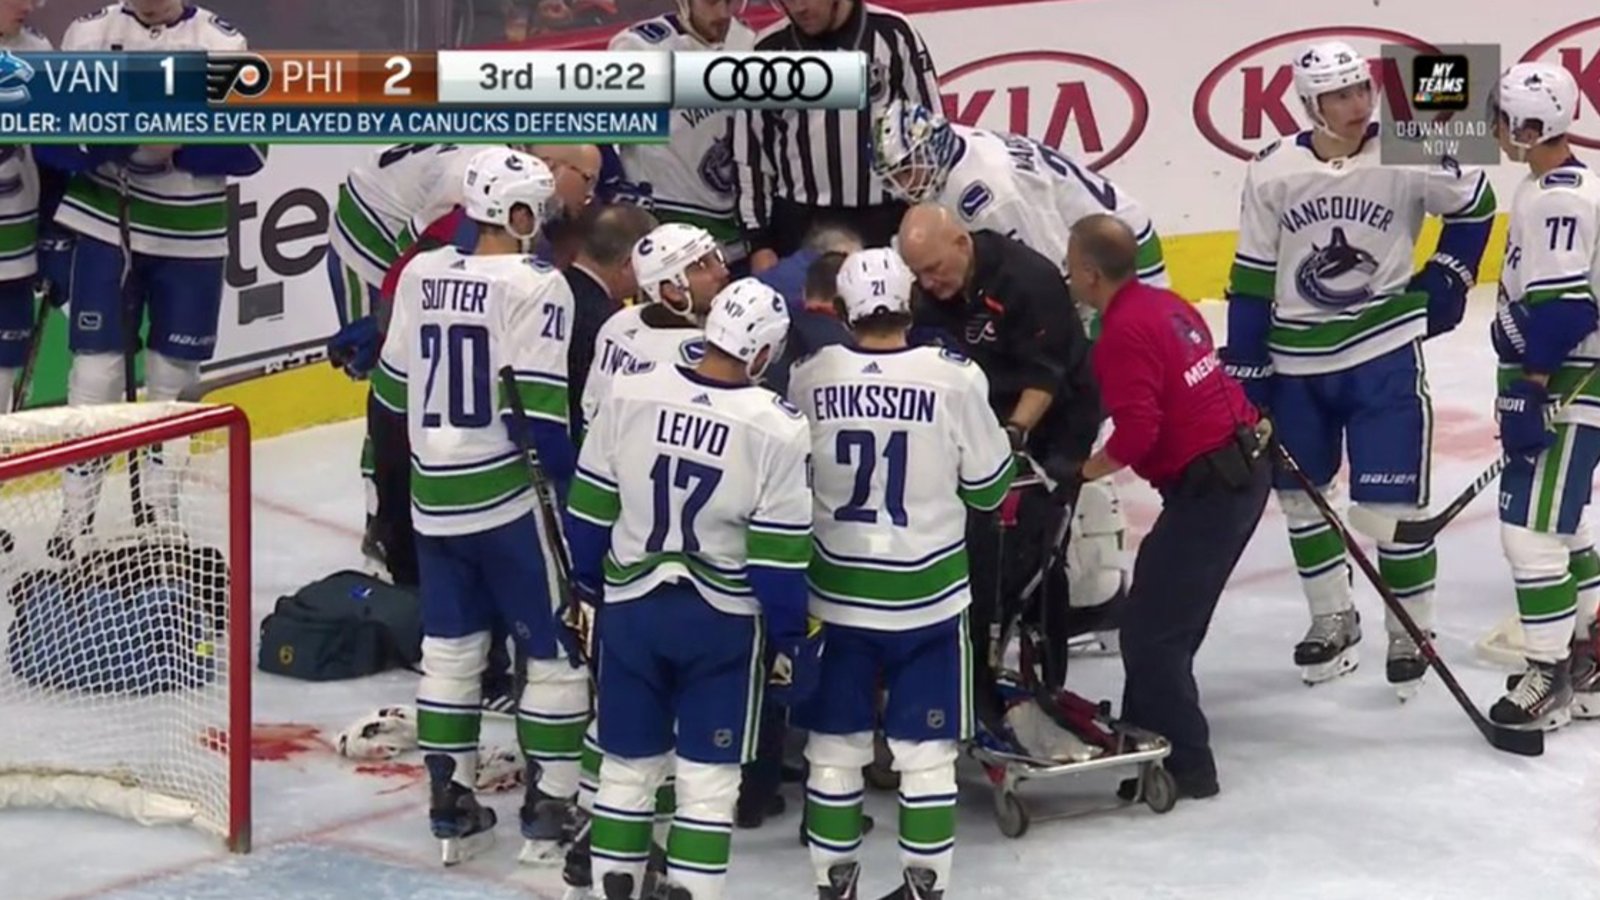 Edler smashes face on the ice, blacks out, is taken off the ice on a stretcher 